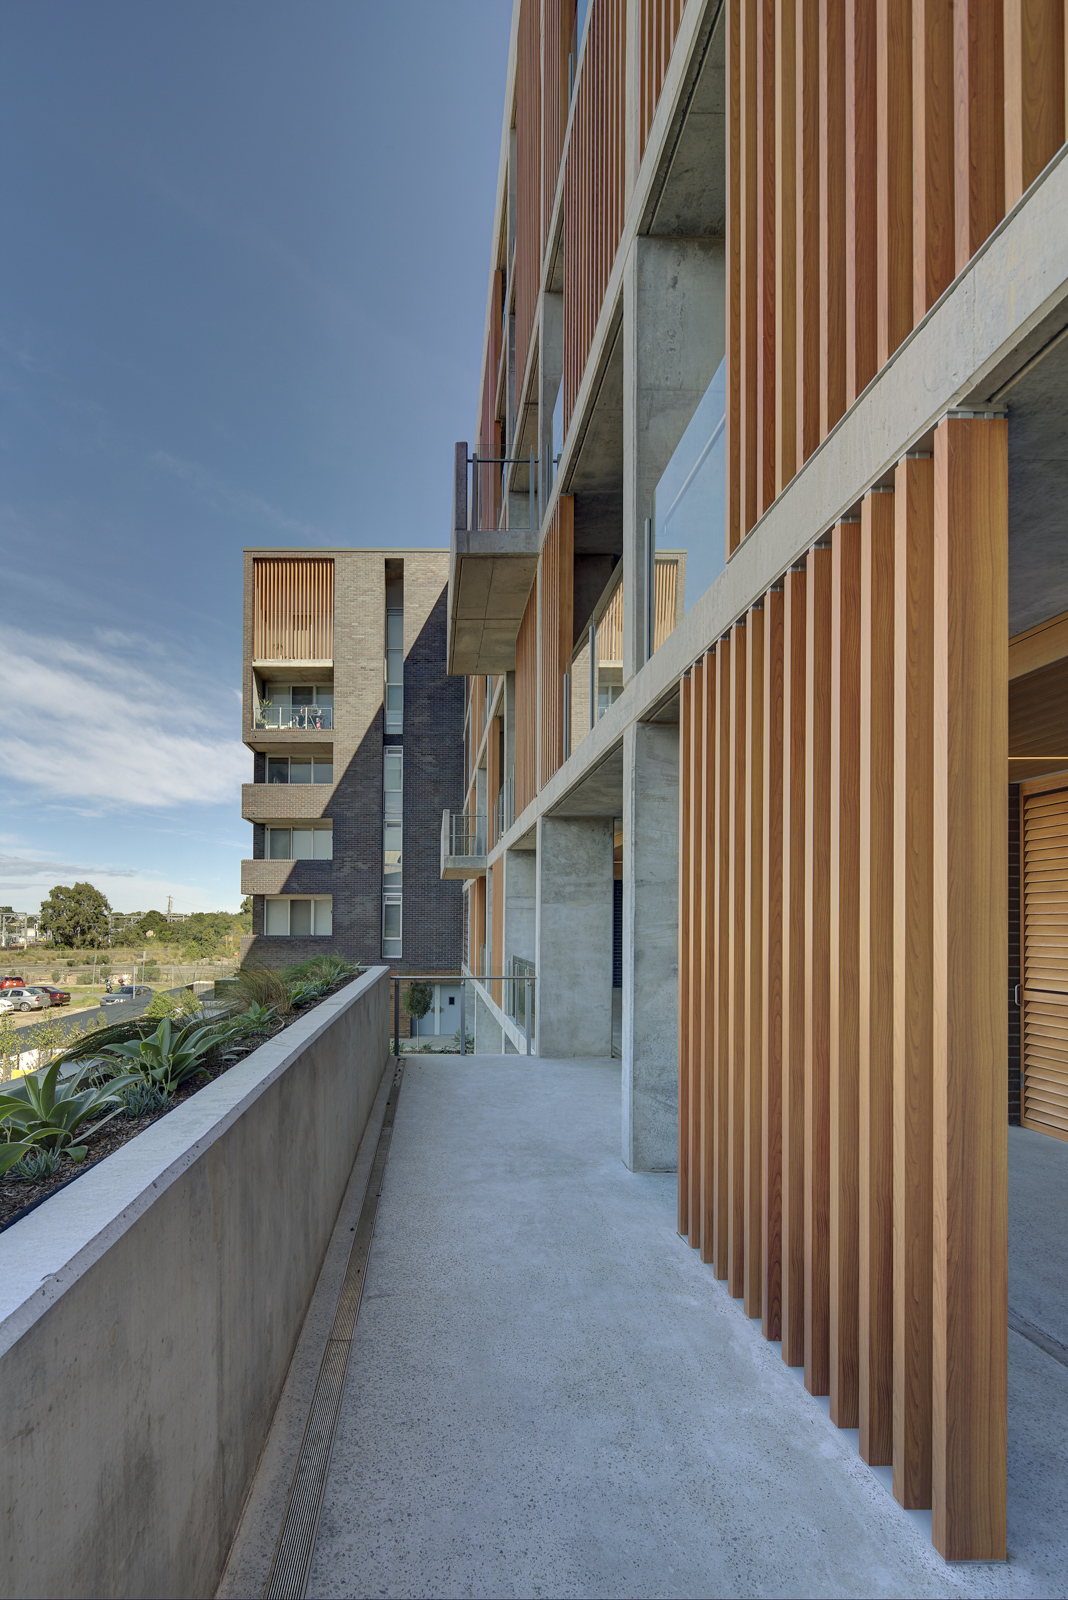 The Platform Apartments are an outstanding example of integrated affordable housing.